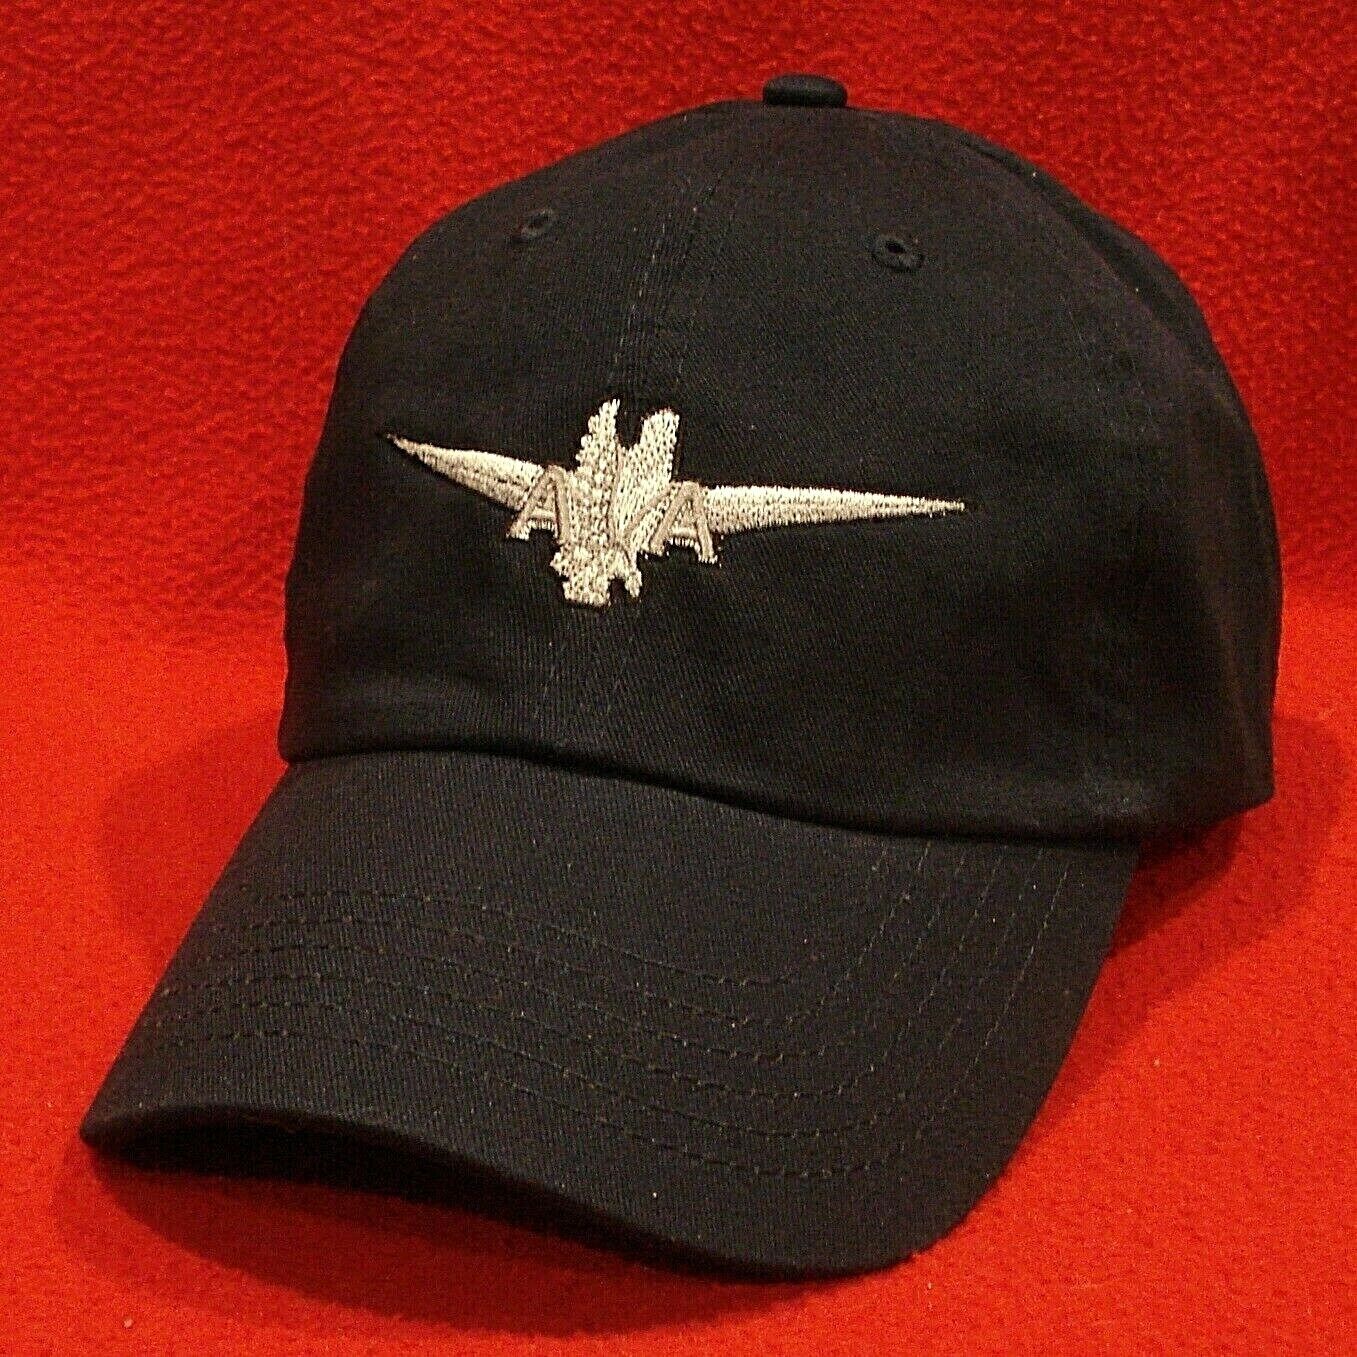 Retro AMR American Air First Officer Pilot Wings ball cap BLUE low-profile hat